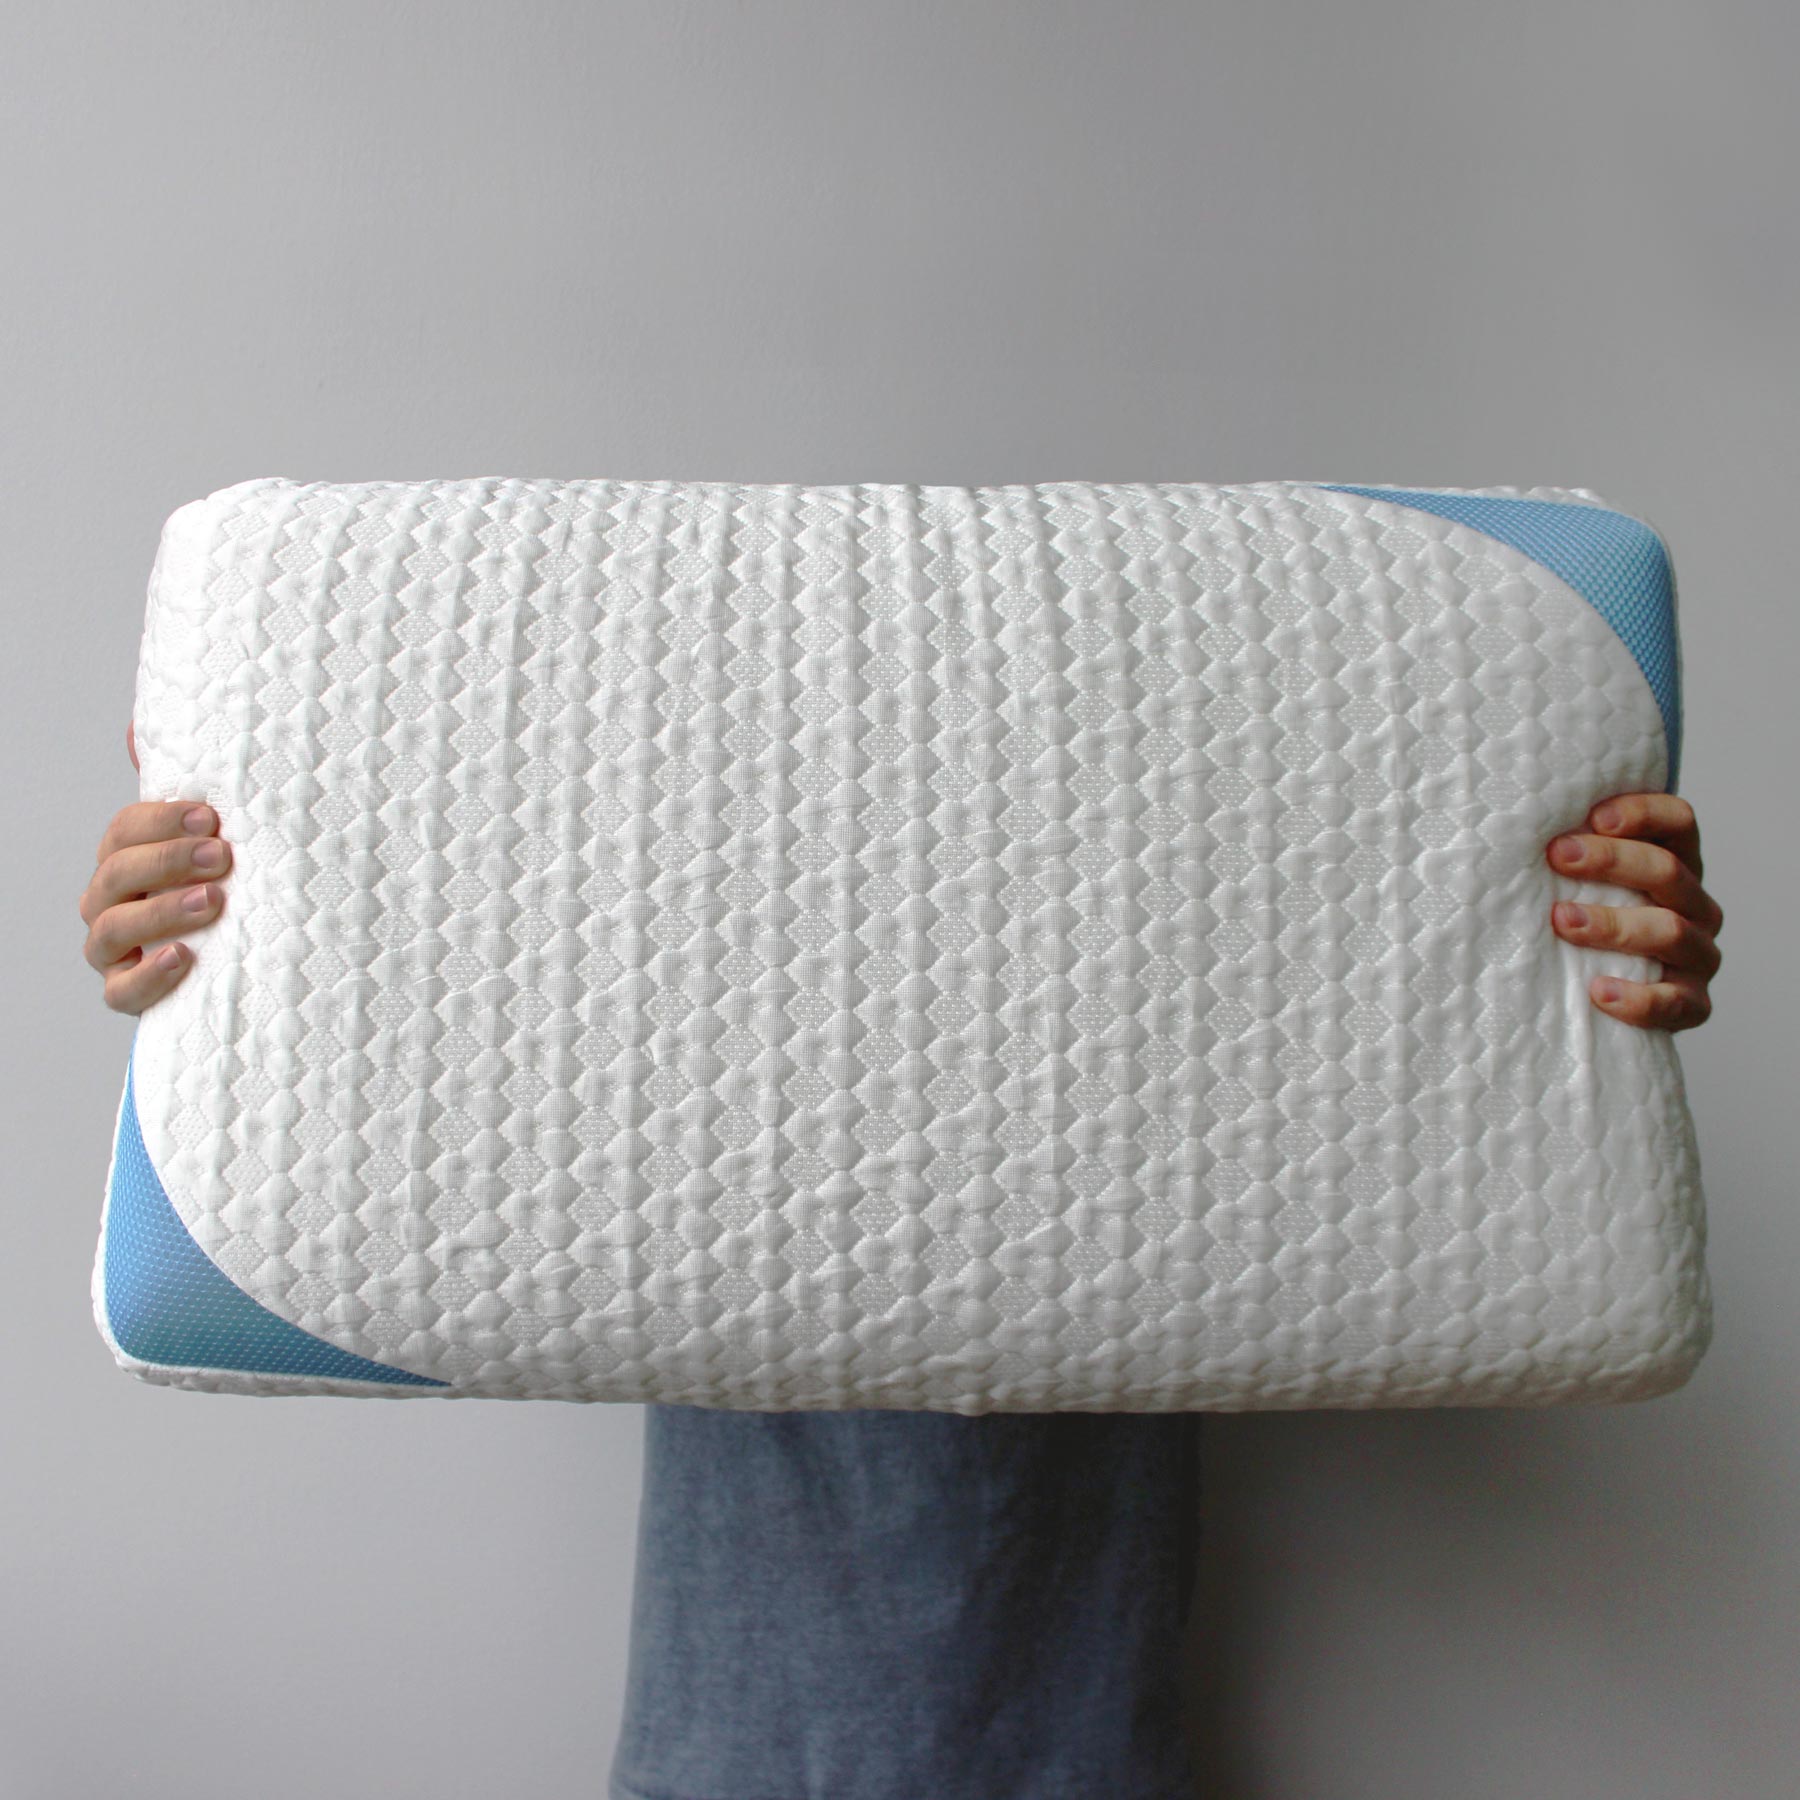  Cool Care Technologies Pillow Cooling Pad - Pressure